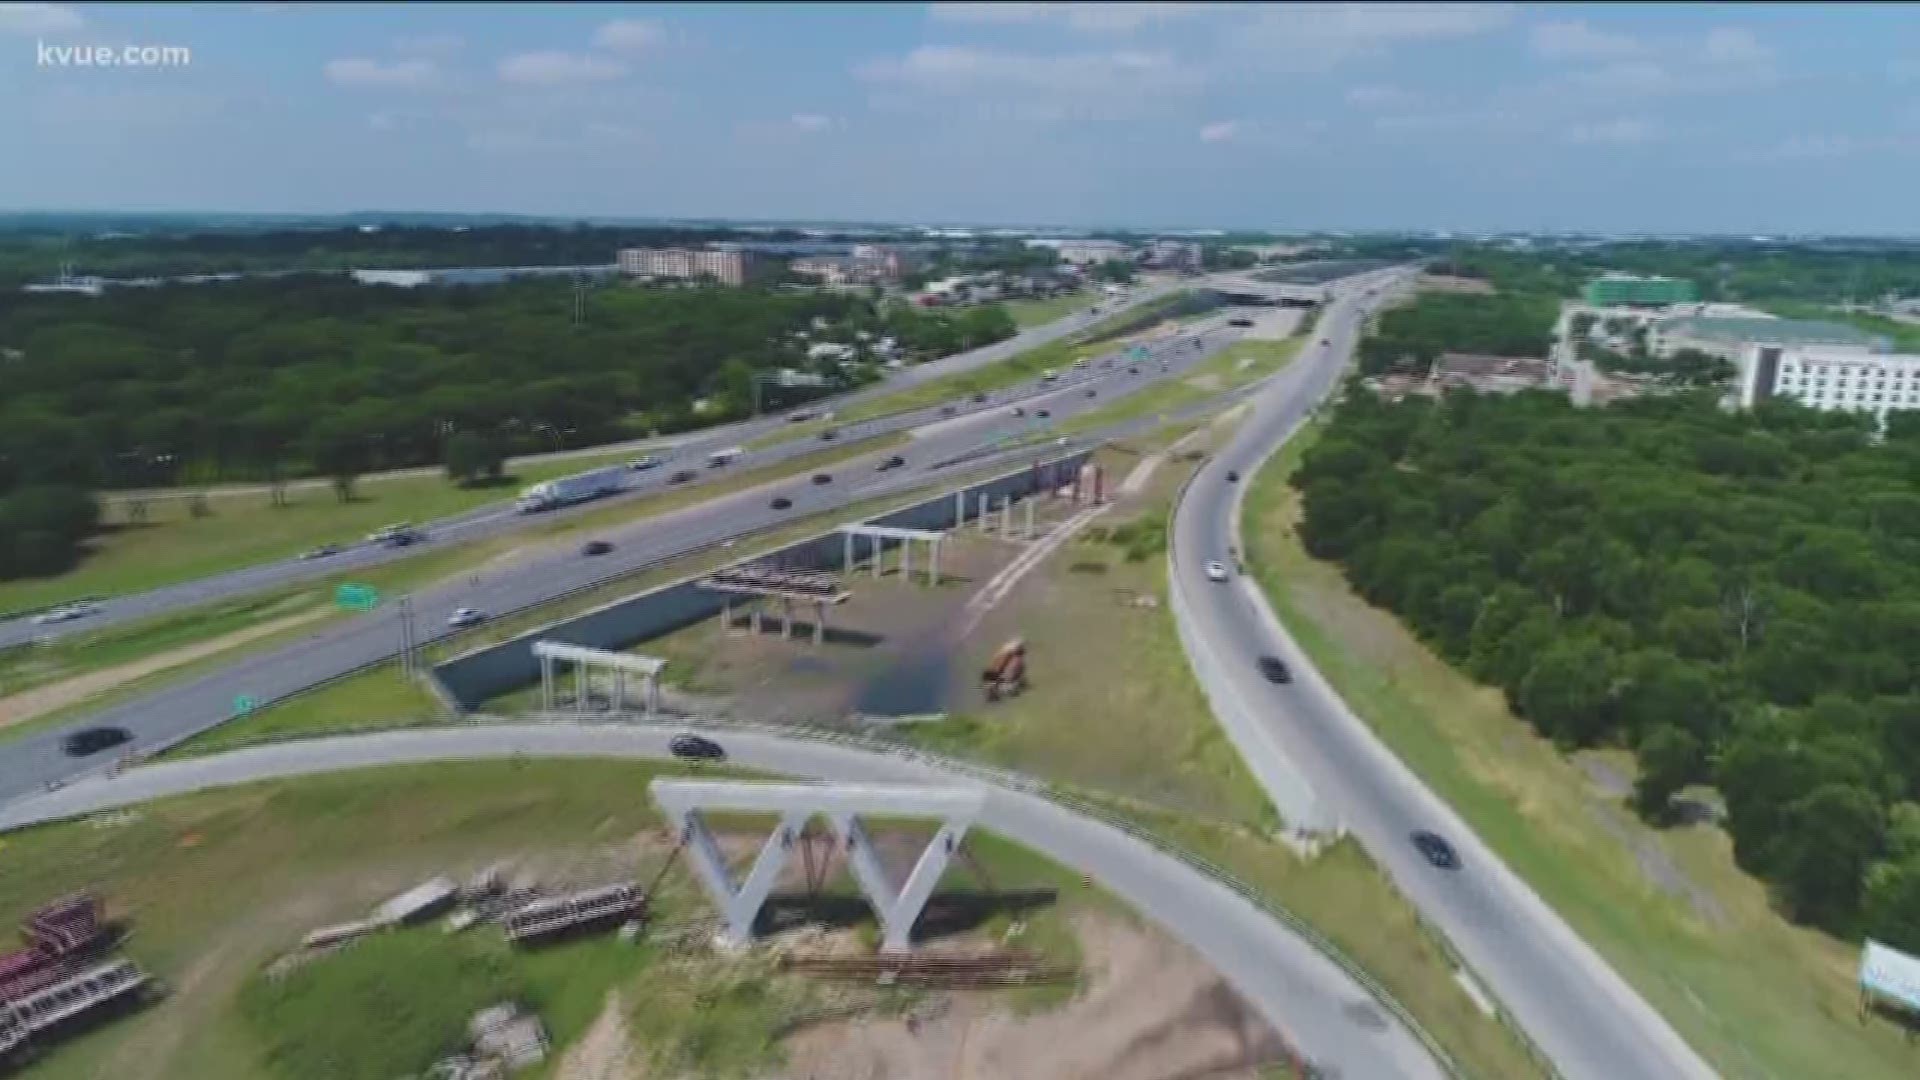 It's fair to say, a lot of Texans don't love toll roads. One viewer wanted to know: why can't more of the road improvement projects lead to "free" roads?